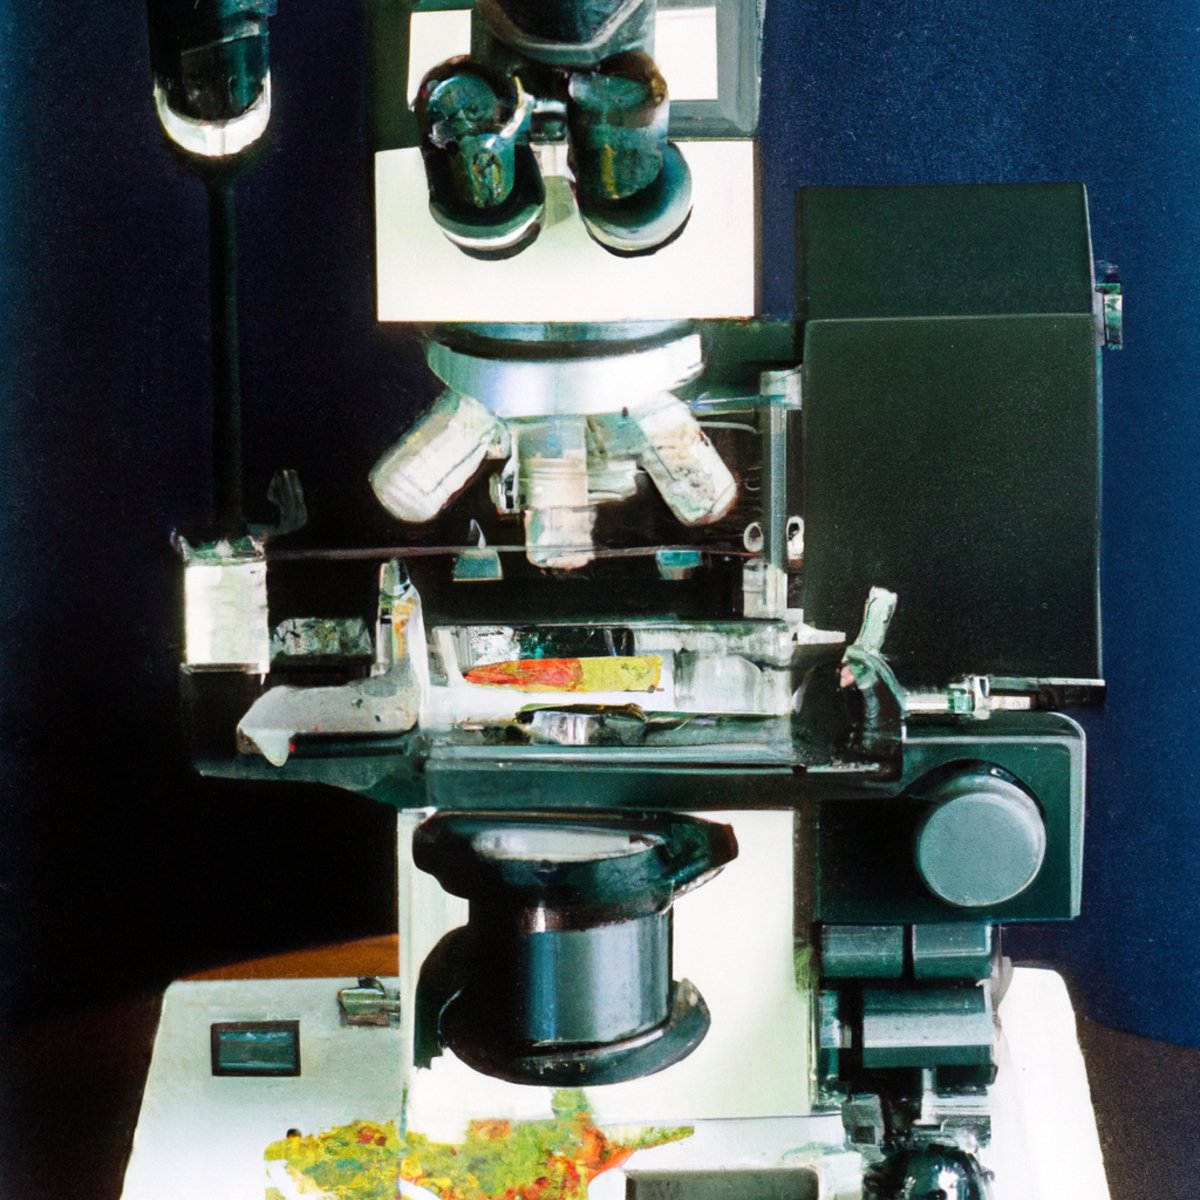 Advanced microscope with precise lens and microscopic samples, symbolizing professional diagnosis and management of Hermansky-Pudlak Syndrome.